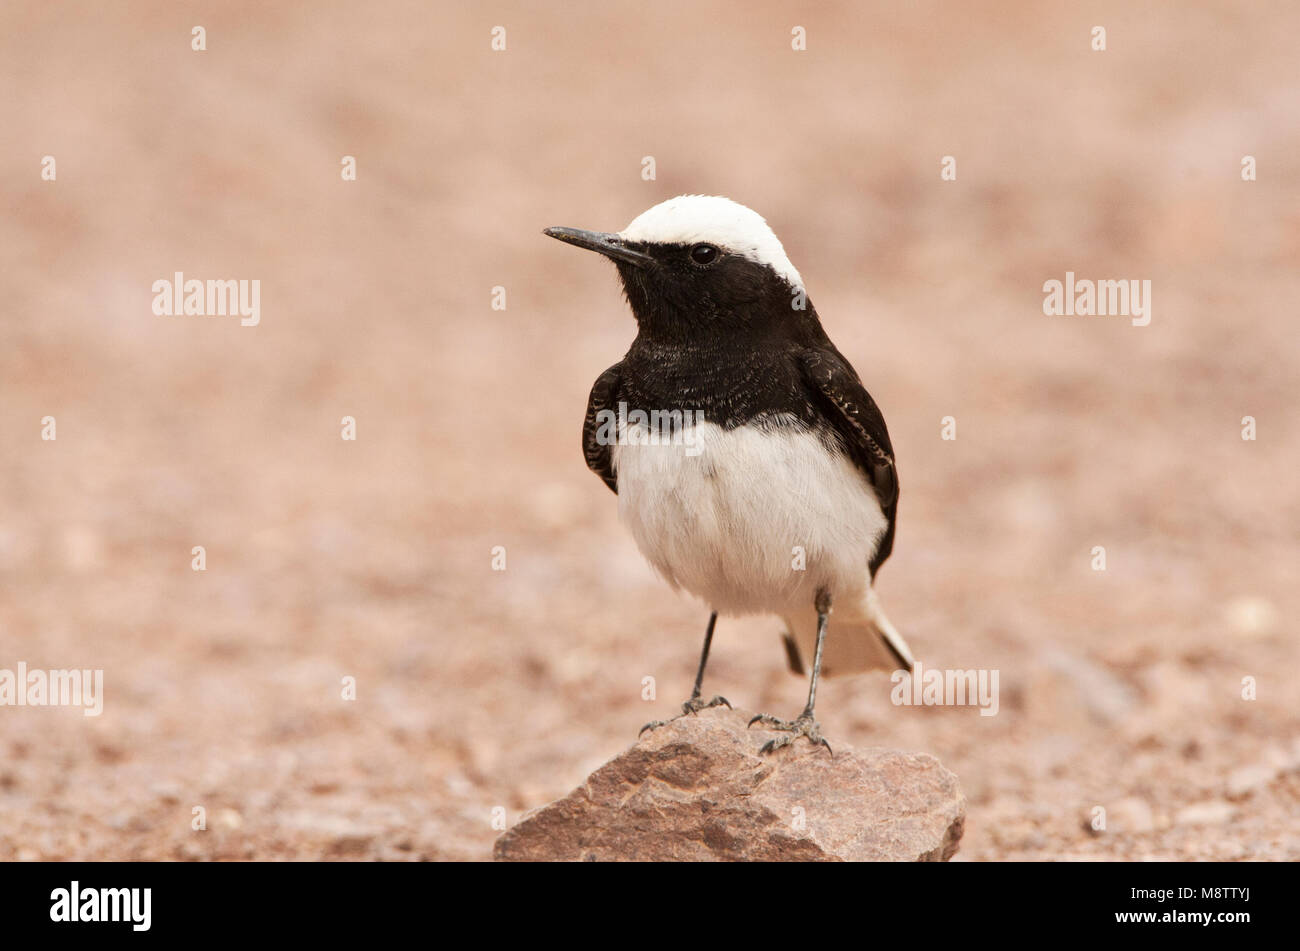 Monnikstapuit; Hooded Wheatear perched on a rock Stock Photo